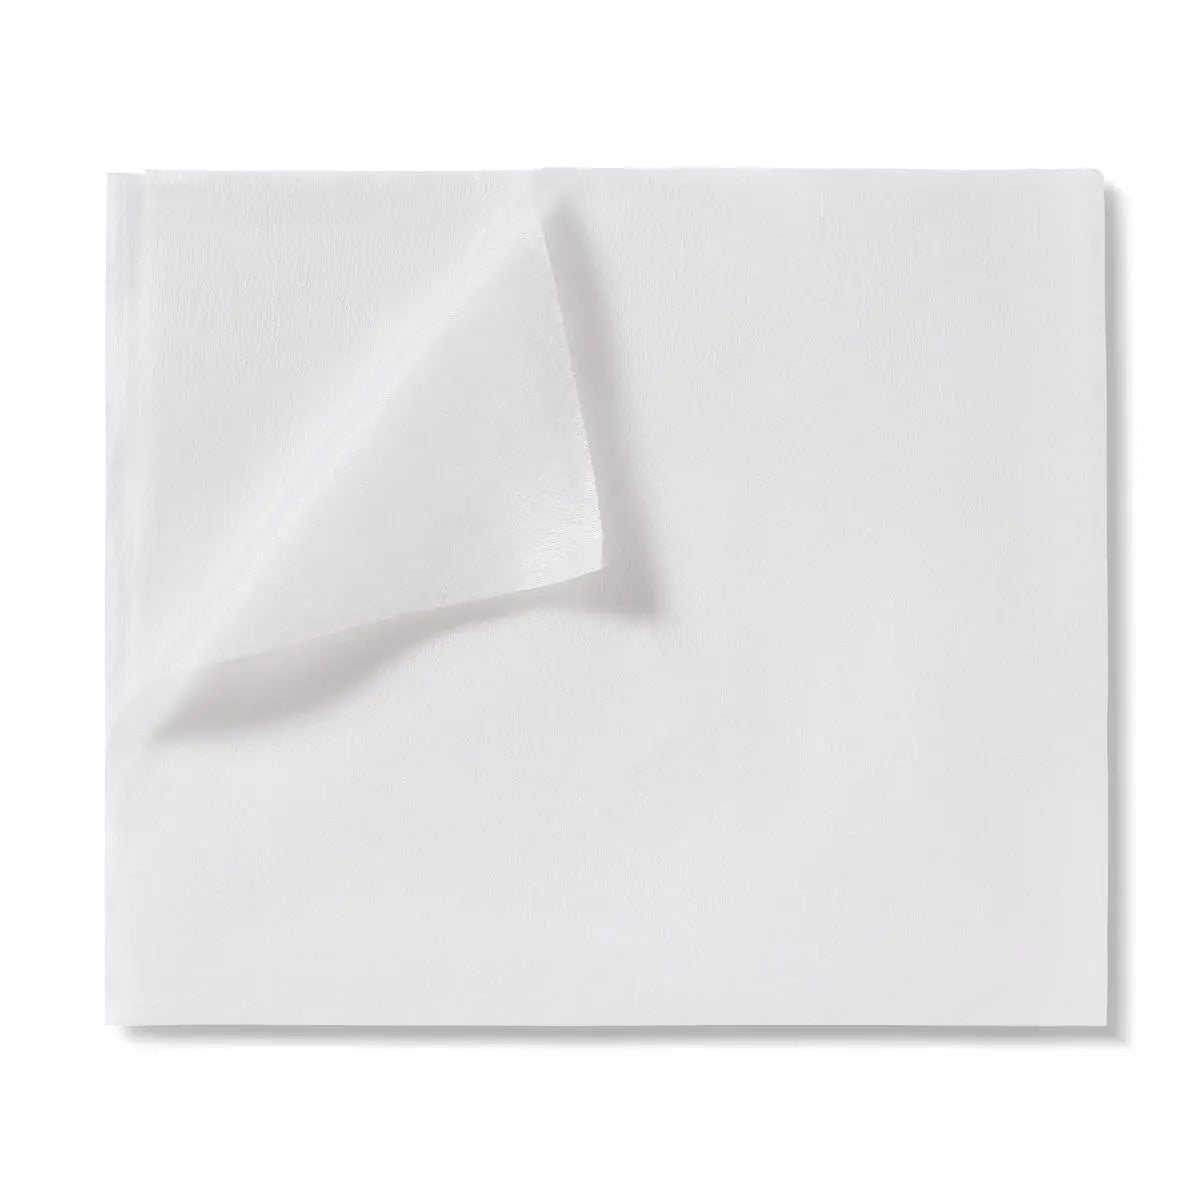 MDL ULTRASOFT71 CS/1200 ULTRA-SOFT DISPOSABLE DRY CLEANING CLOTH.